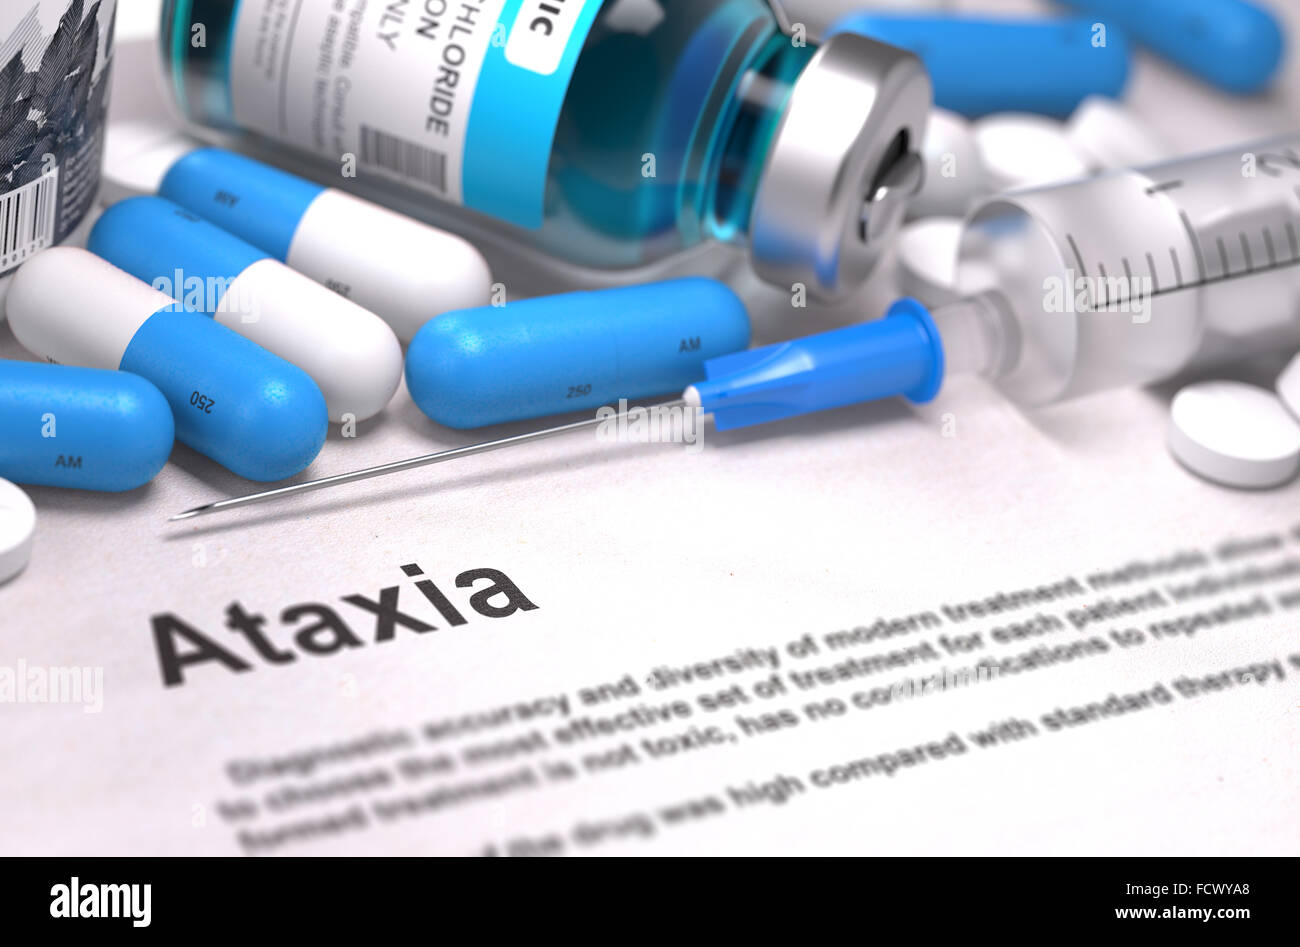 Ataxia - Printed Diagnosis with Blue Pills, Injections and Syringe. Medical Concept with Selective Focus. Stock Photo